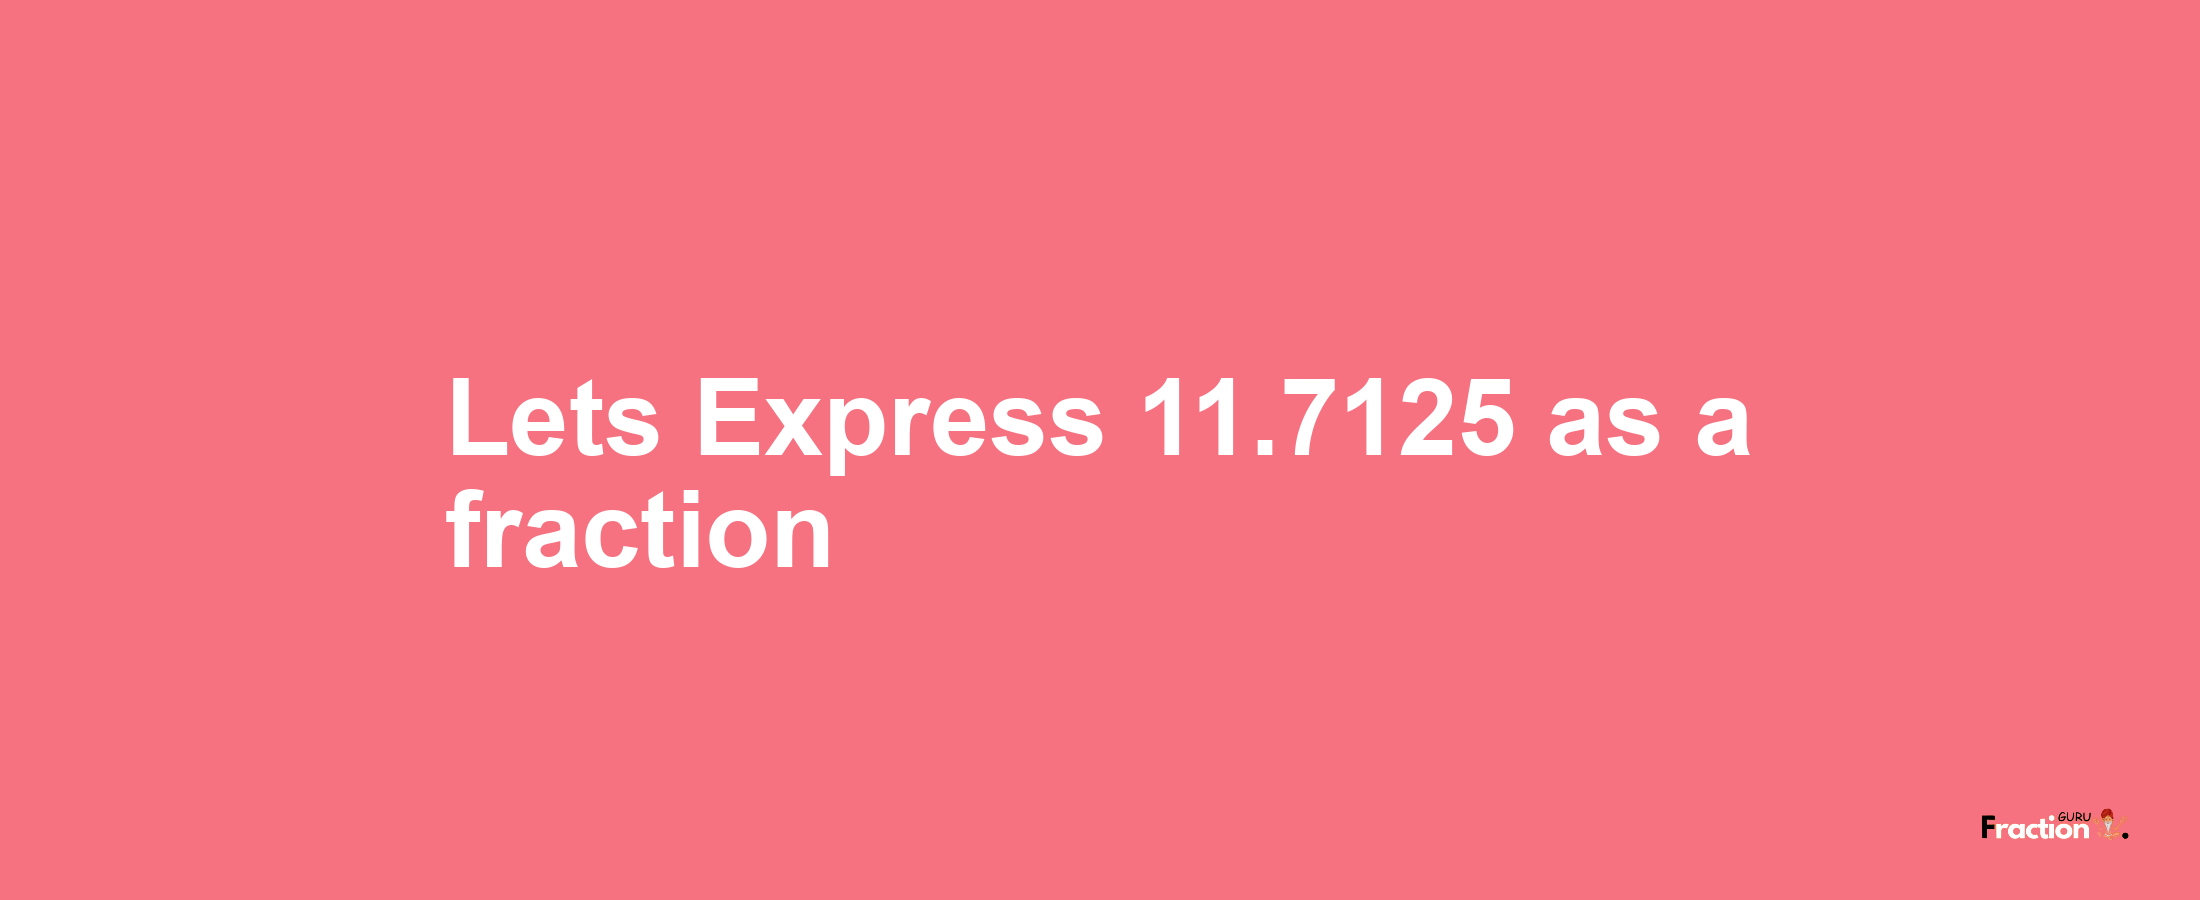 Lets Express 11.7125 as afraction